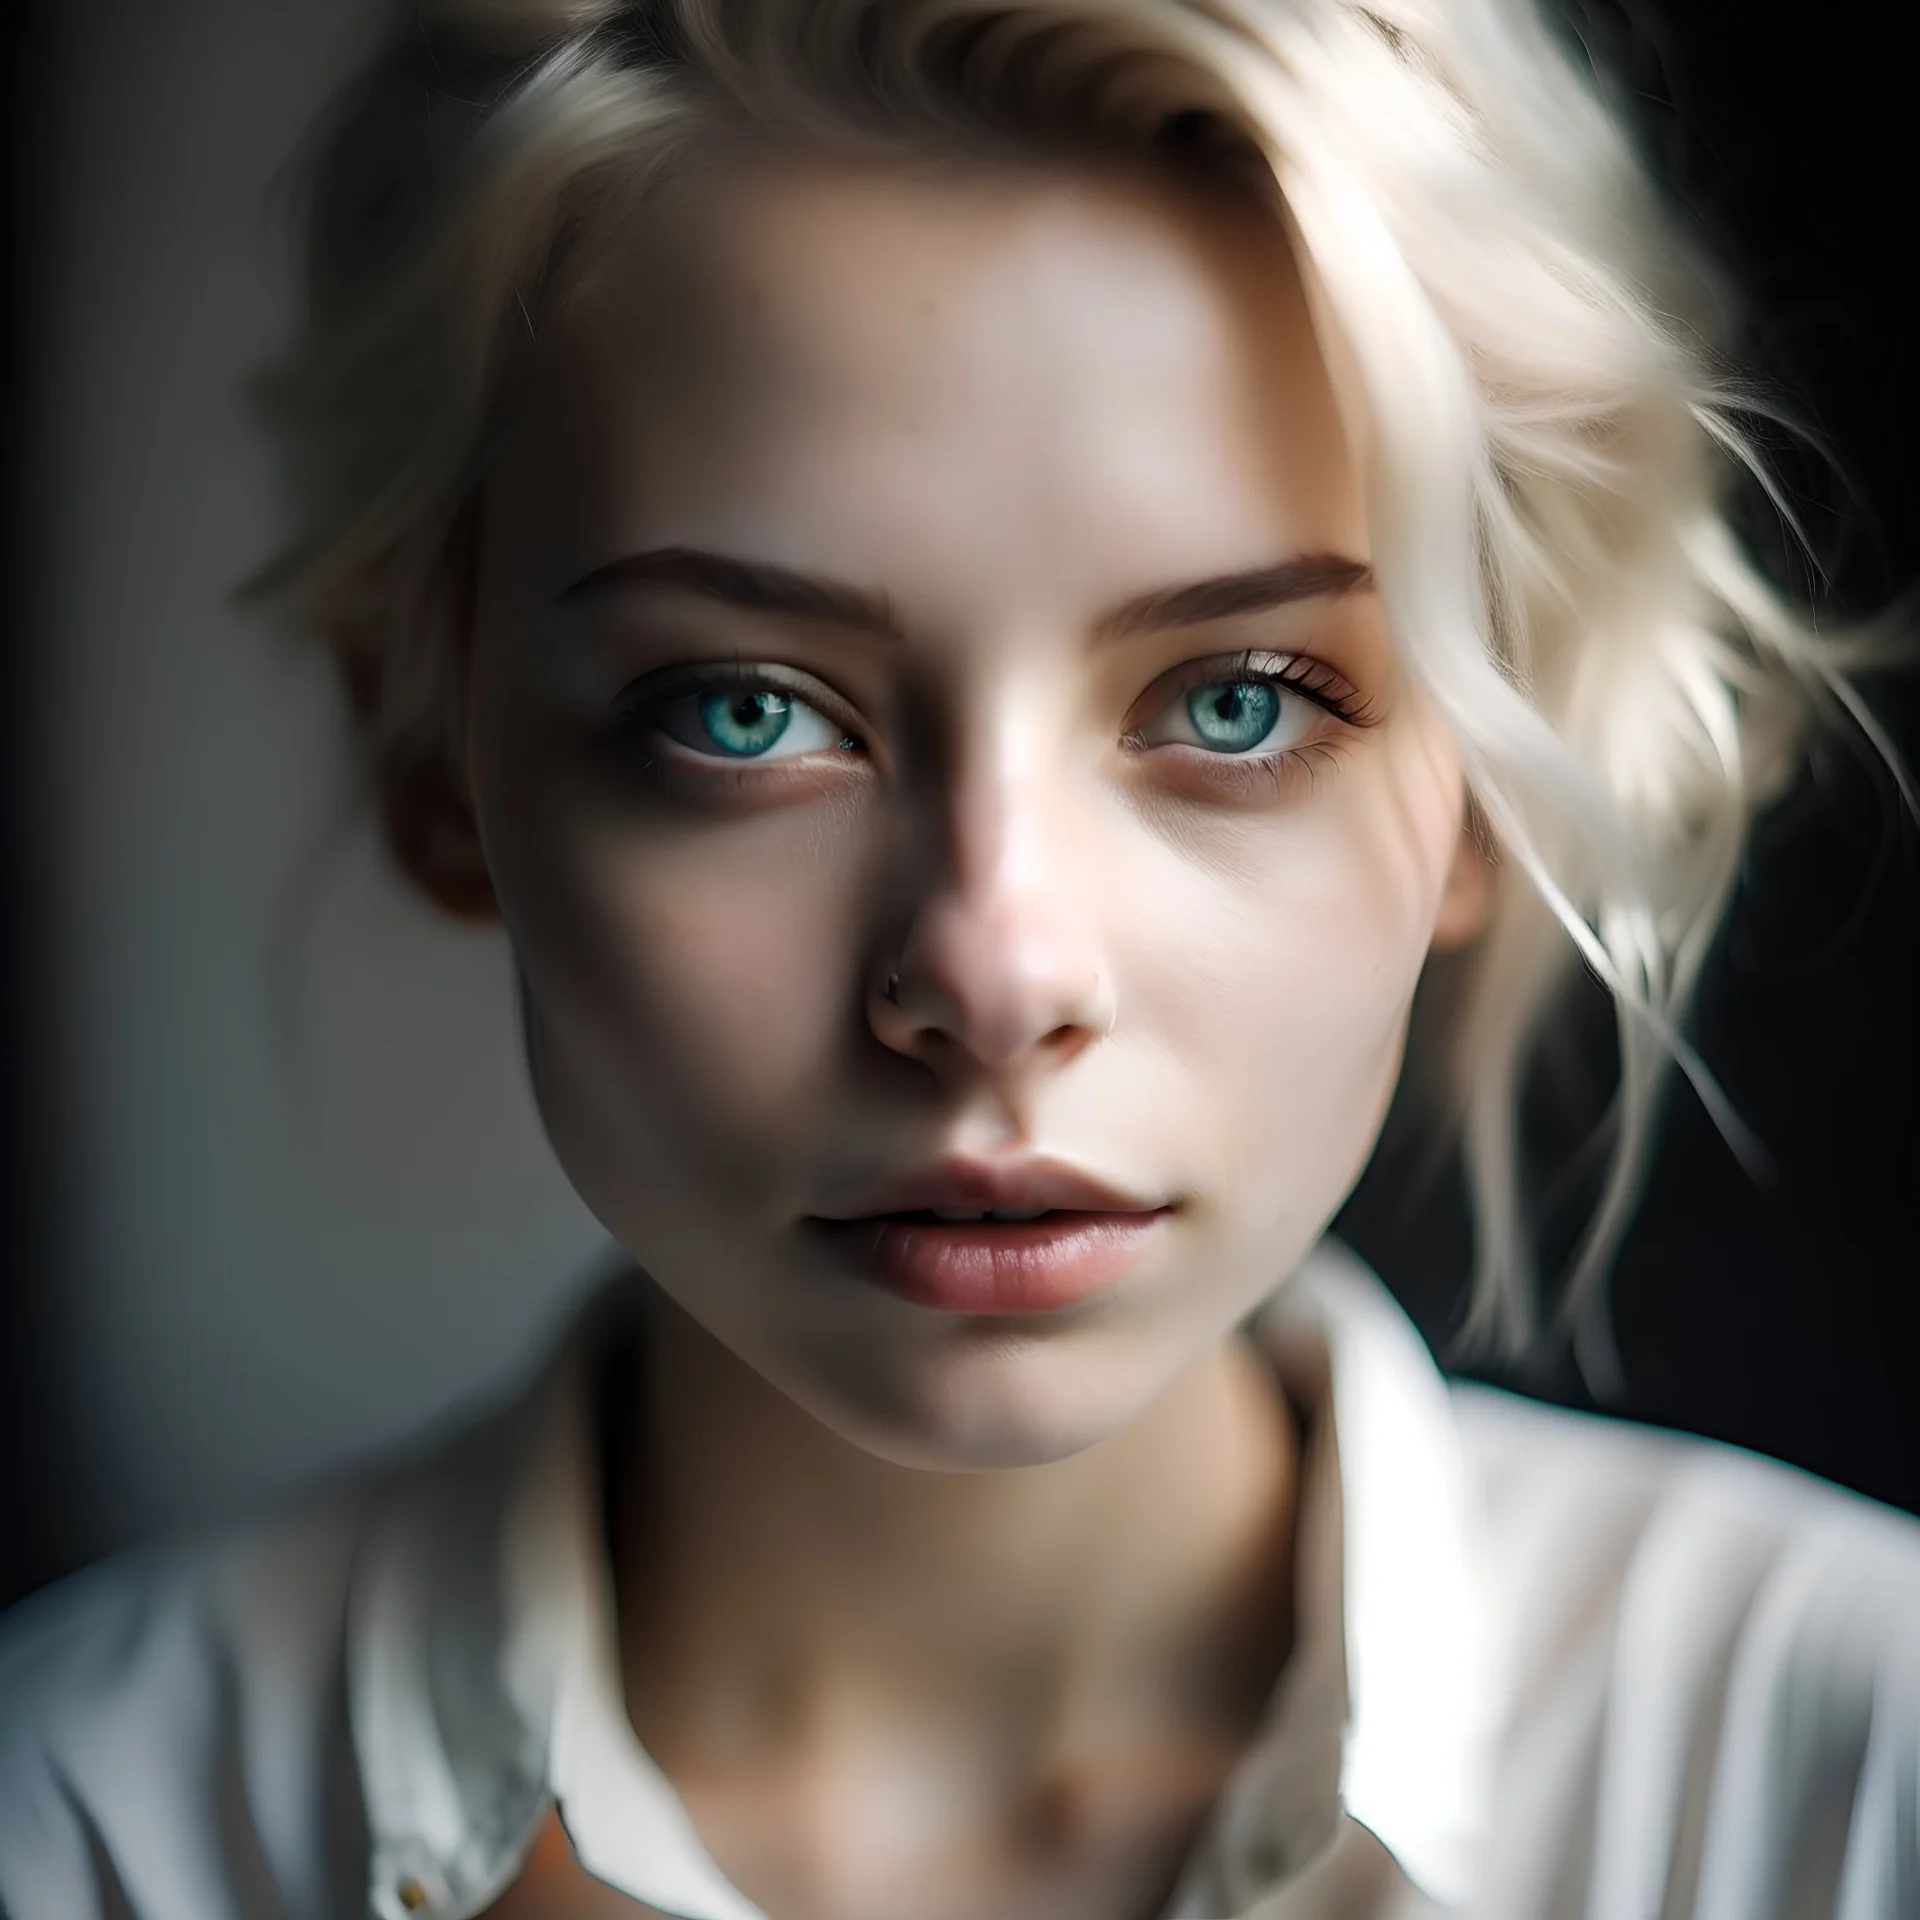 woman, twenty years old, white blond shortish hair, wavy, strong facial features, sof nose, light grey eyes, light pale skin, rose lips whithe shirt, portrait, close up, beatiful young woman, many shadows, hair tied up, loose strands framing face, NO piercings